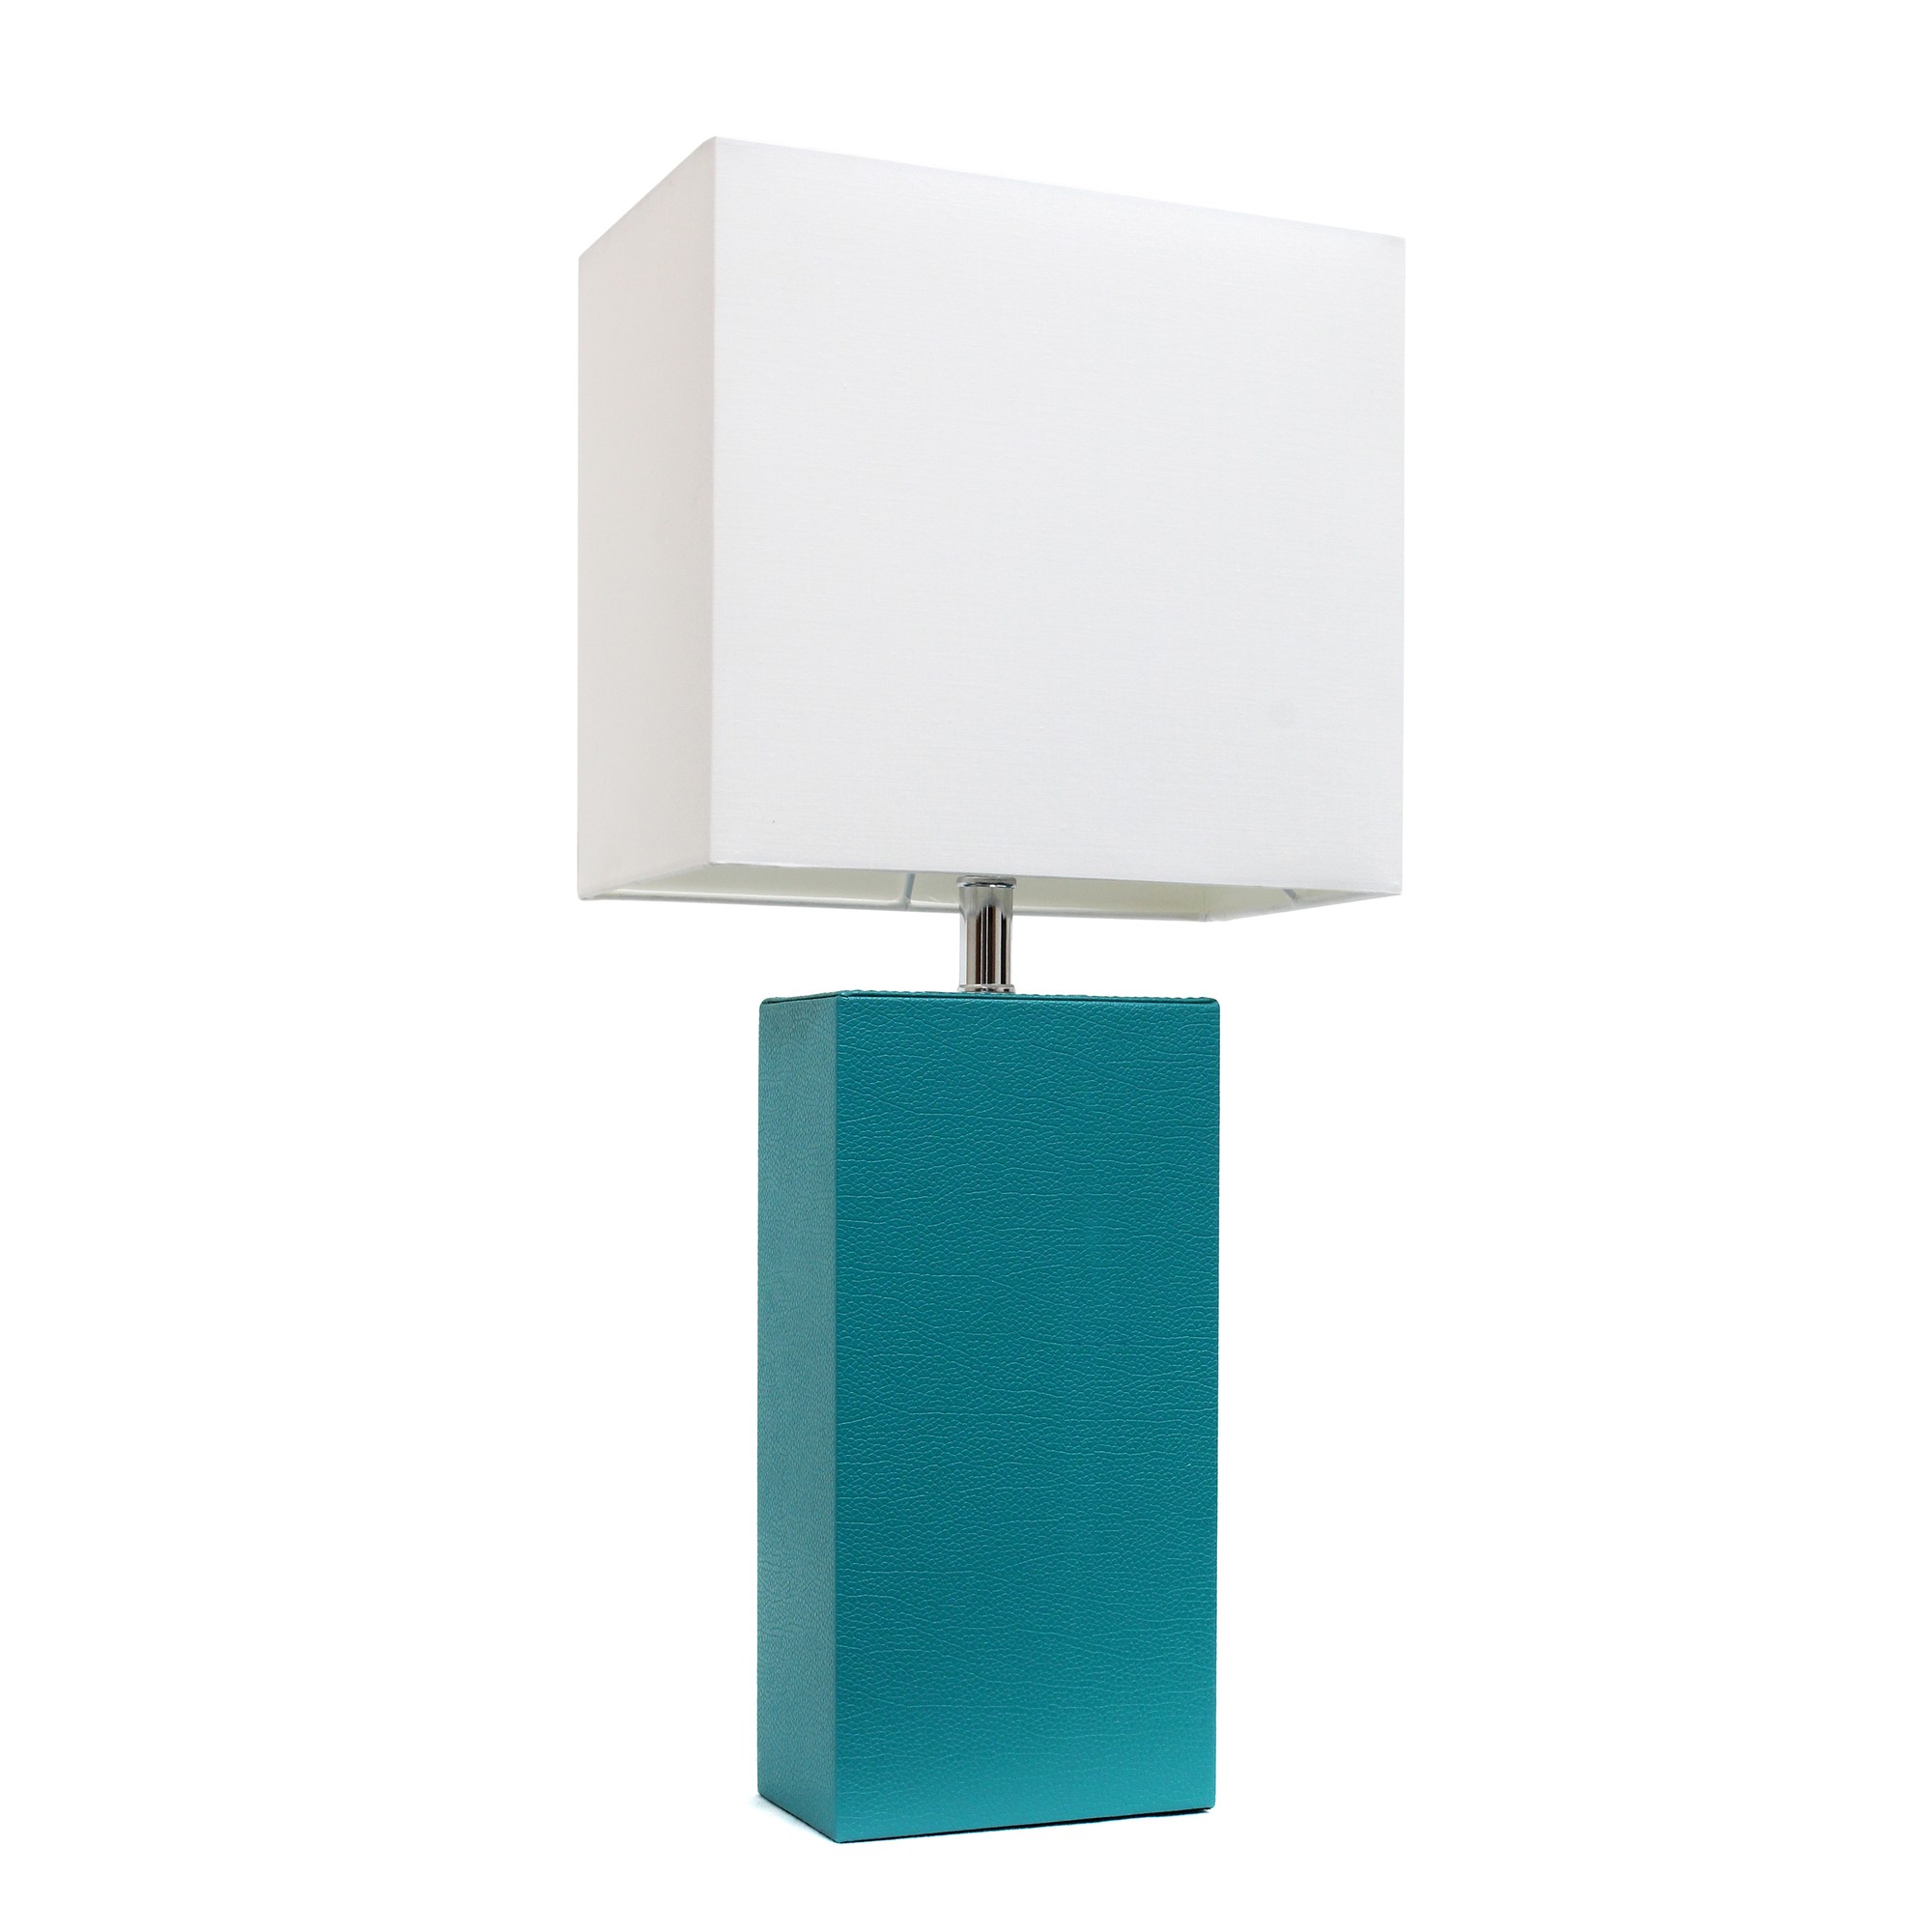 21in Leather Base Table Lamp with White Shade Teal